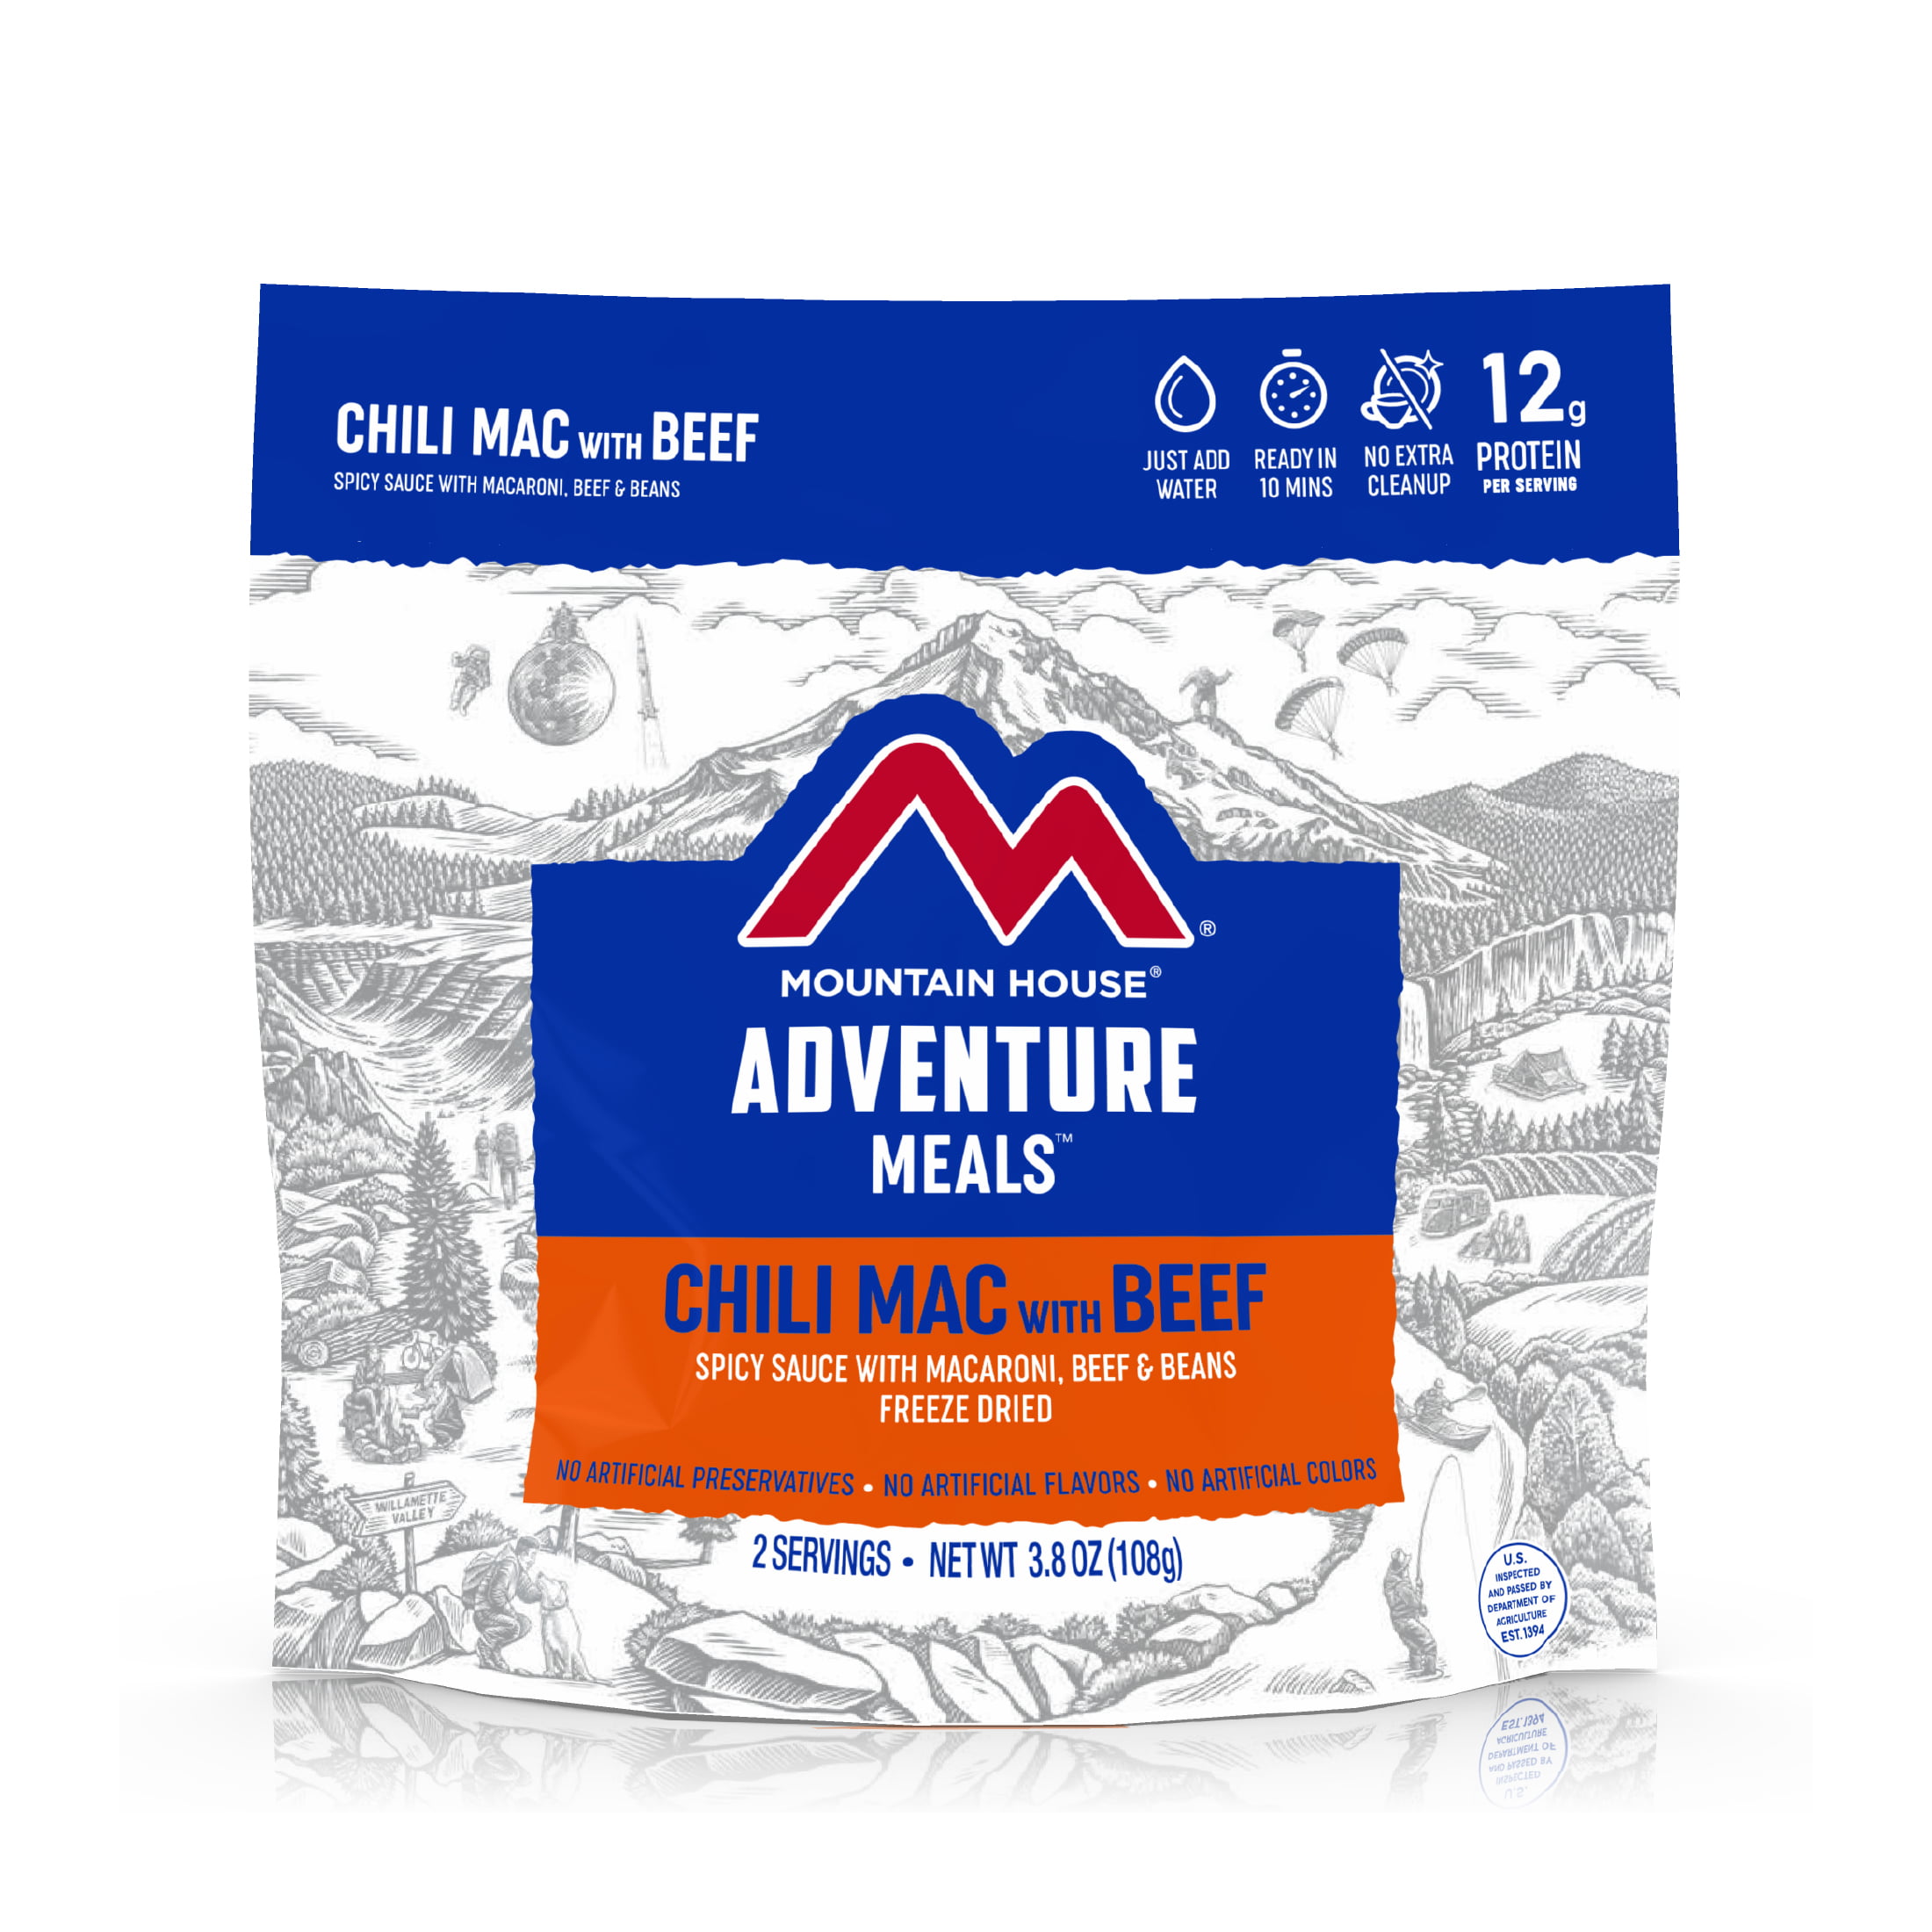 Freeze-dried Chili Mac with Beef for Preppers